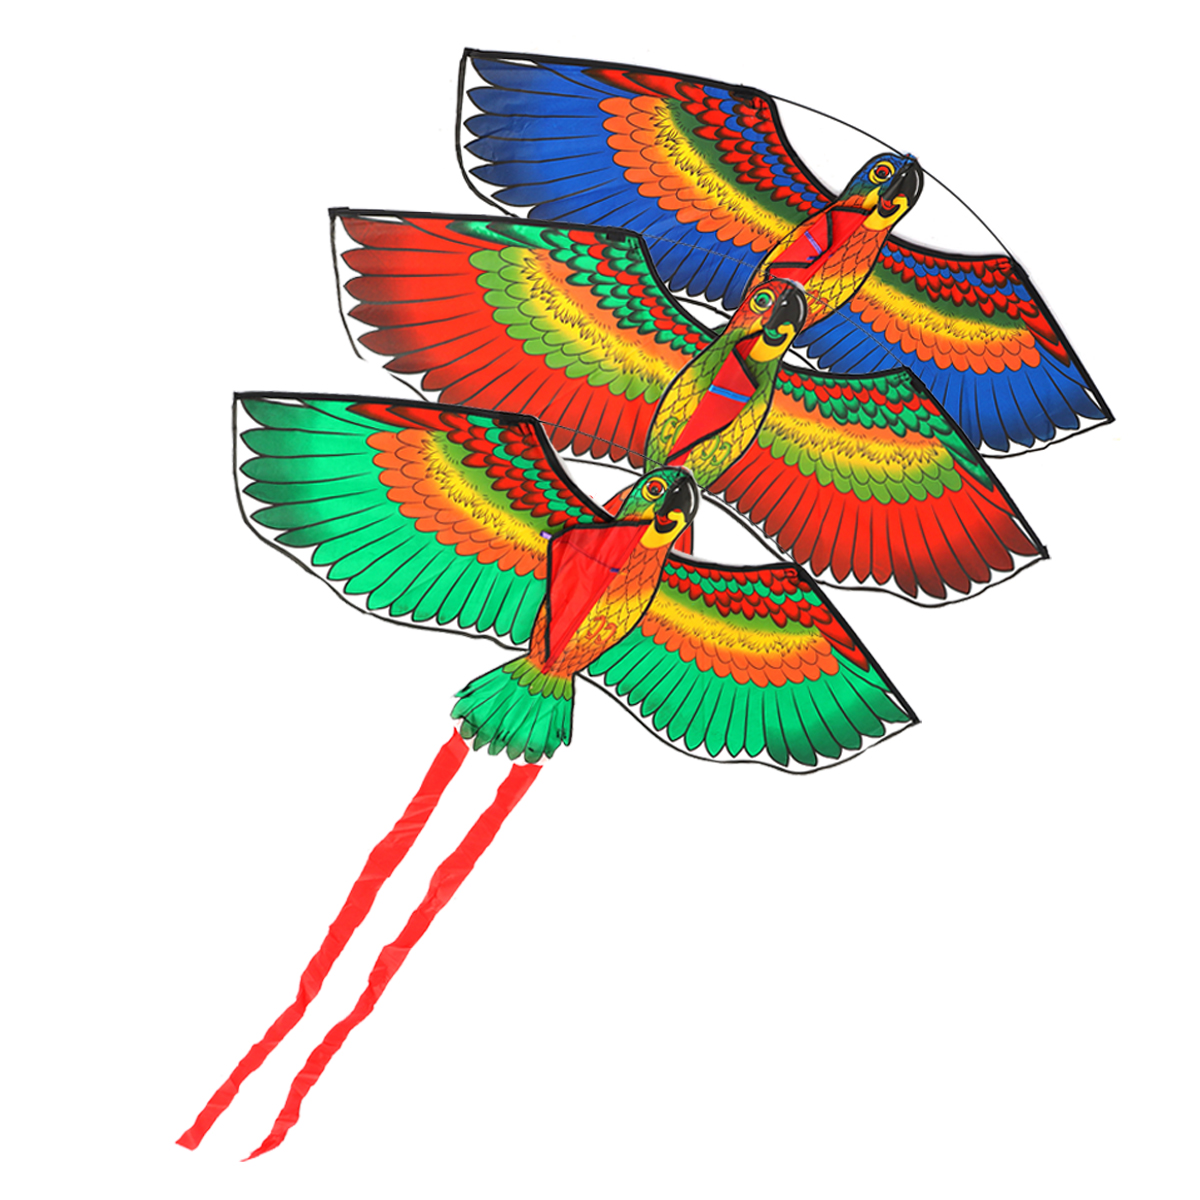 Outdoor-Beach-Park-Polyester-Camping-Flying-Kite-Bird-Parrot-Steady-With-String-Spool-For-Adults-Kid-1347624-1